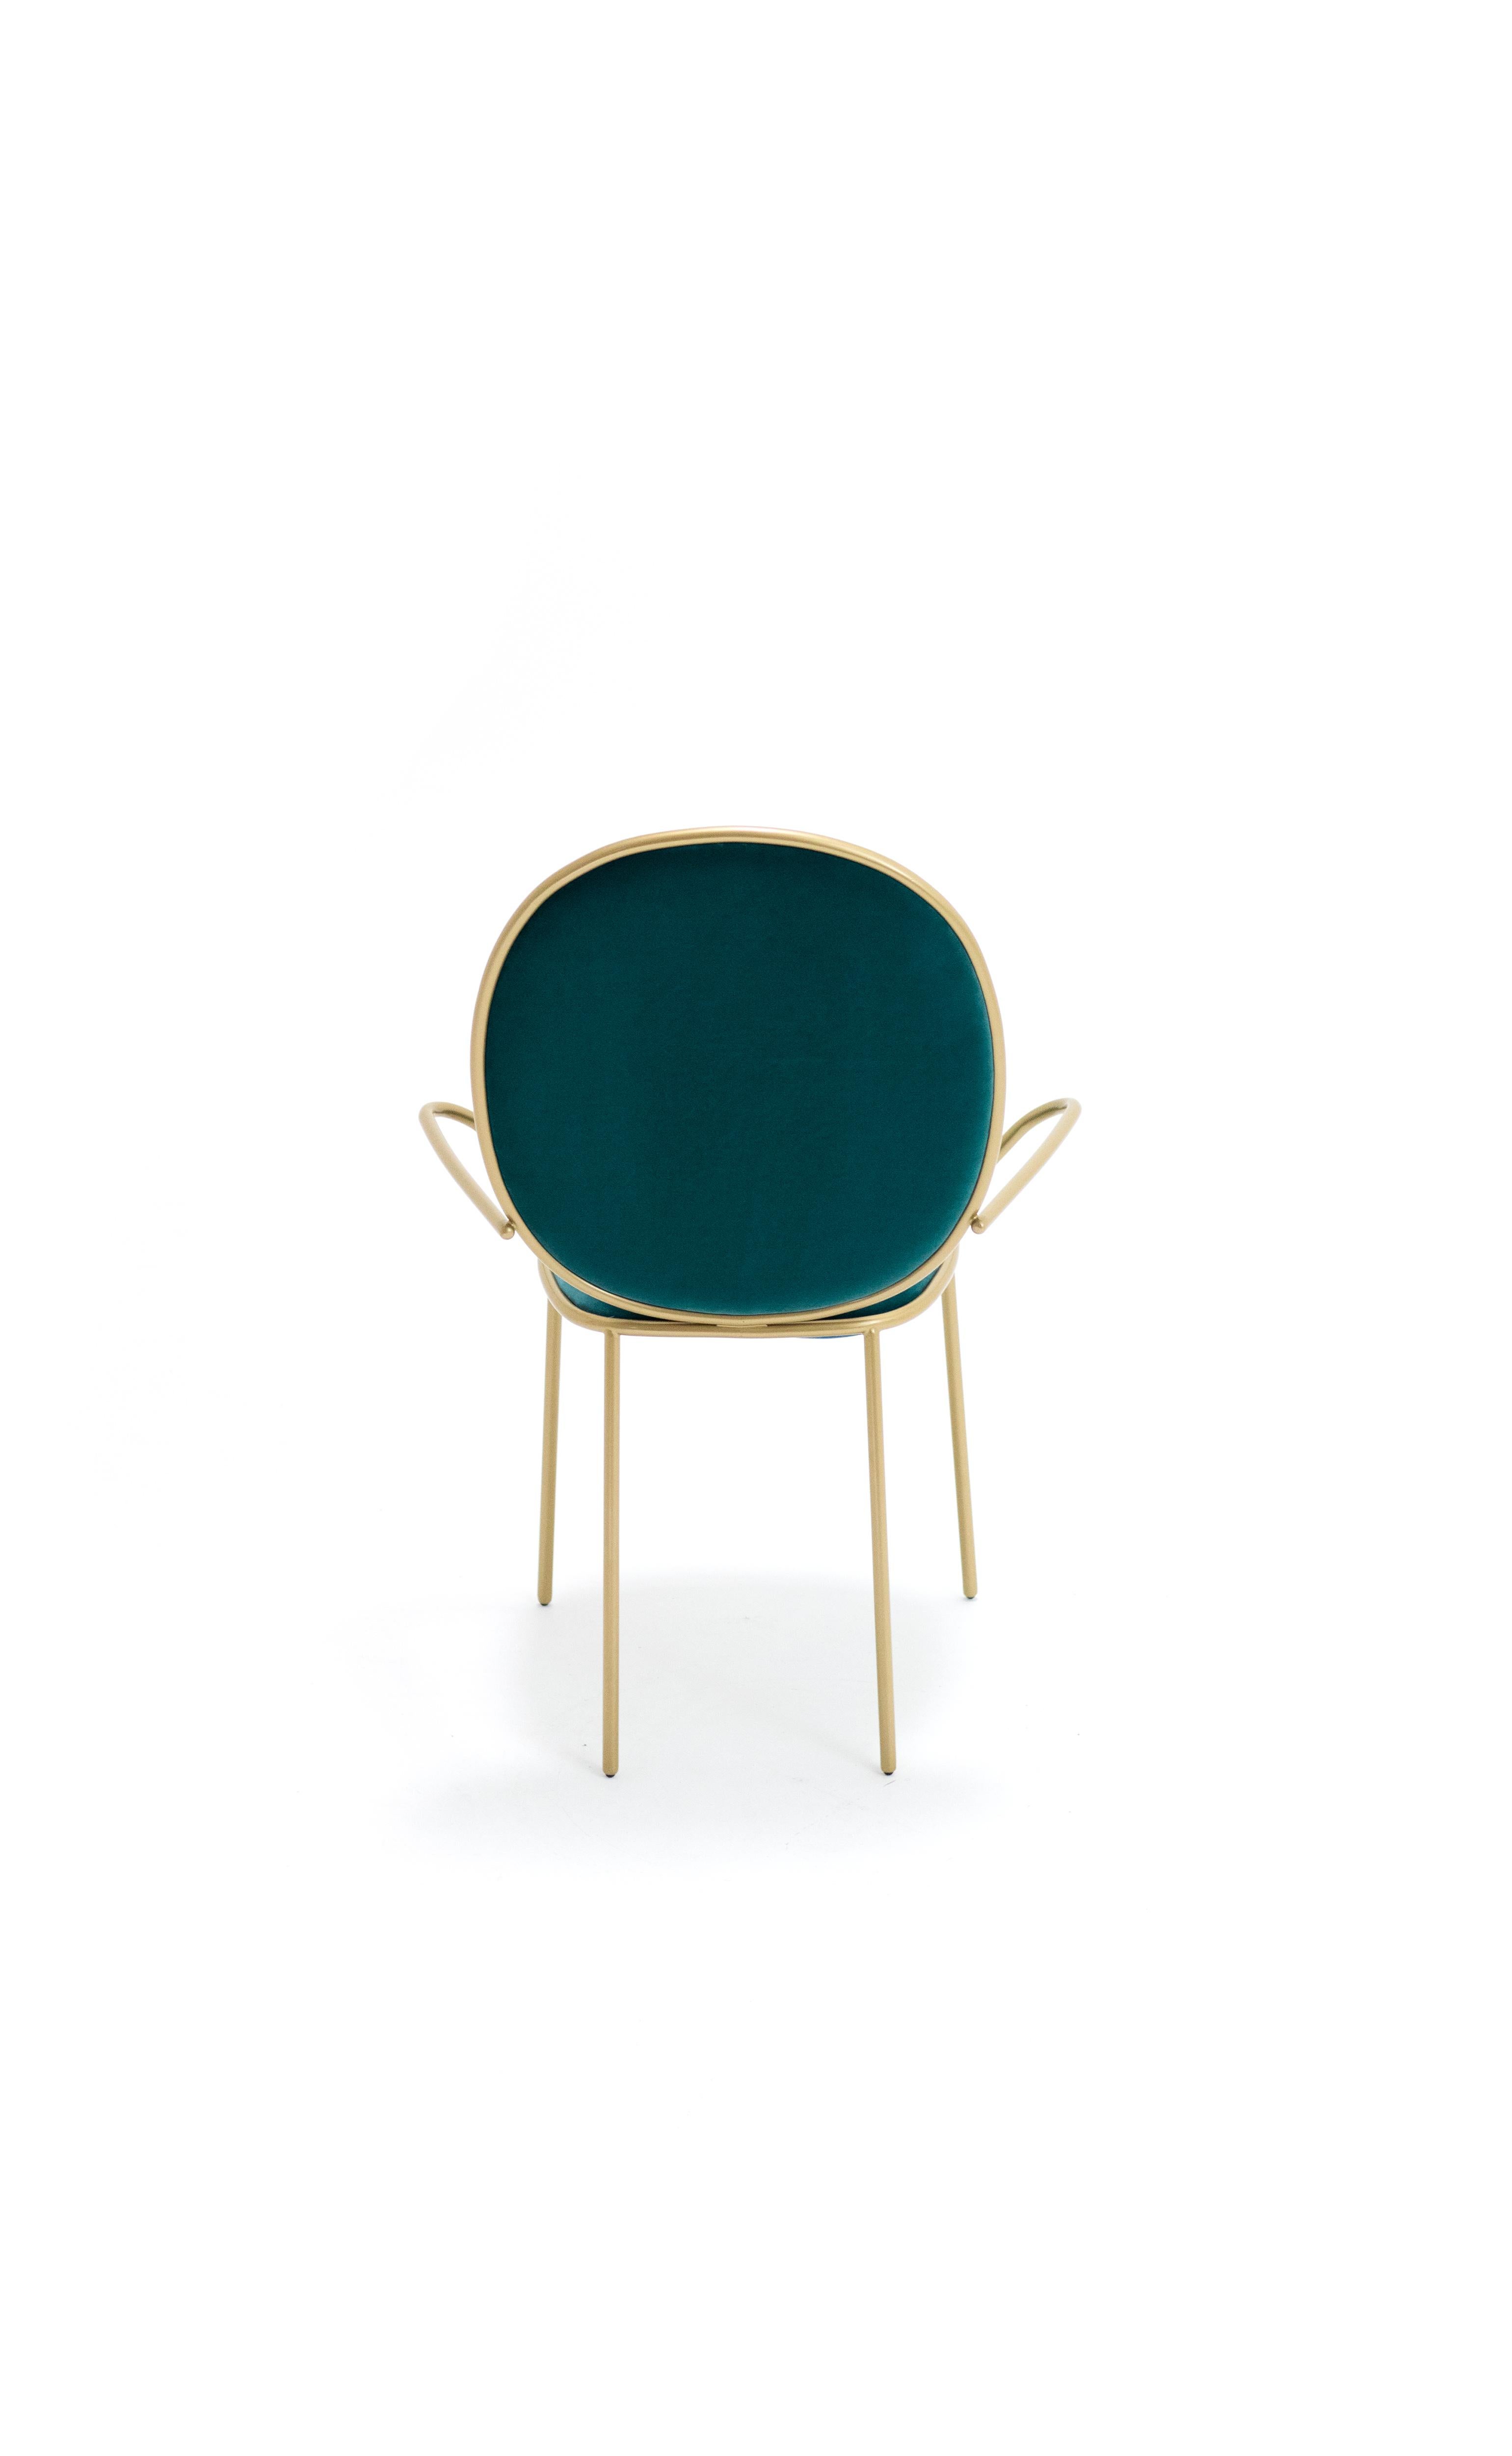 Contemporary Ocean Green Velvet Upholstered Dining Armchair, Stay by Nika Zupanc For Sale 1